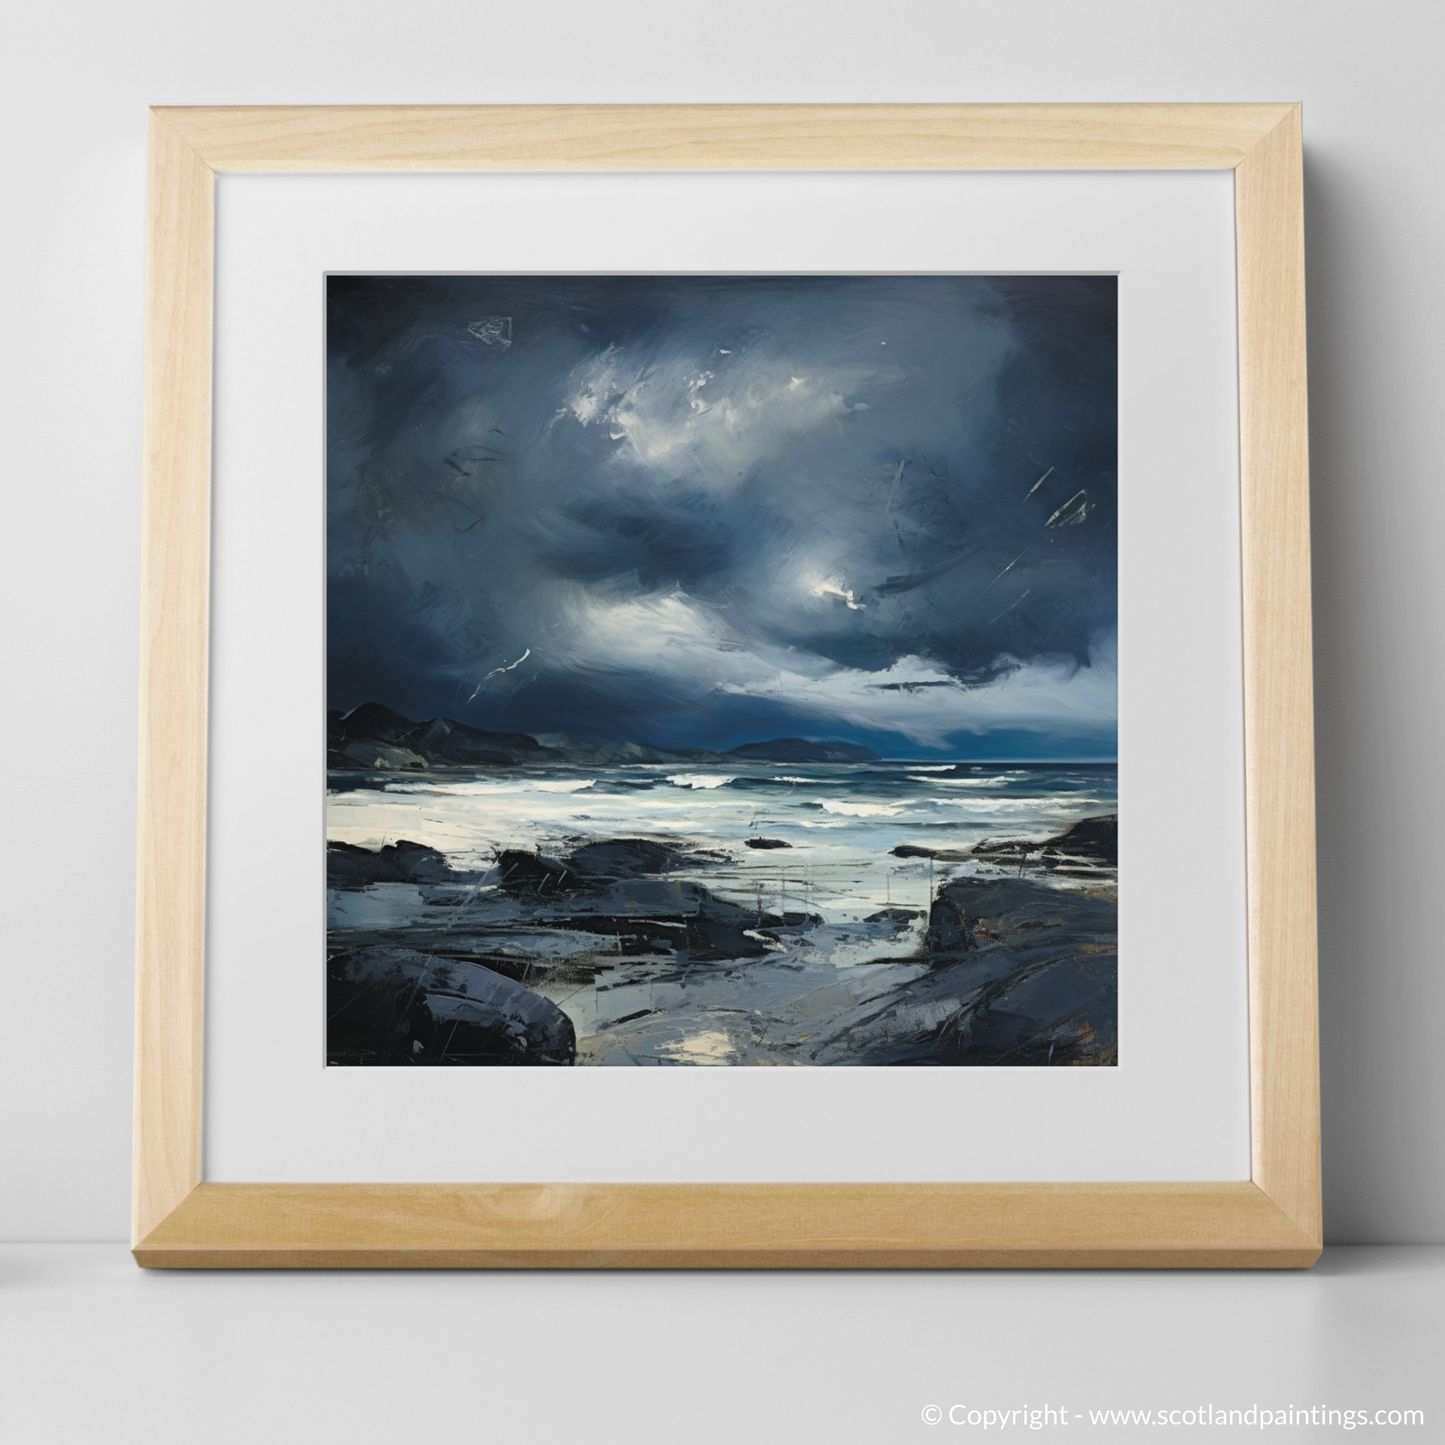 Tempestuous Camusdarach: An Abstract Expressionist Ode to Scotland's Stormy Shores